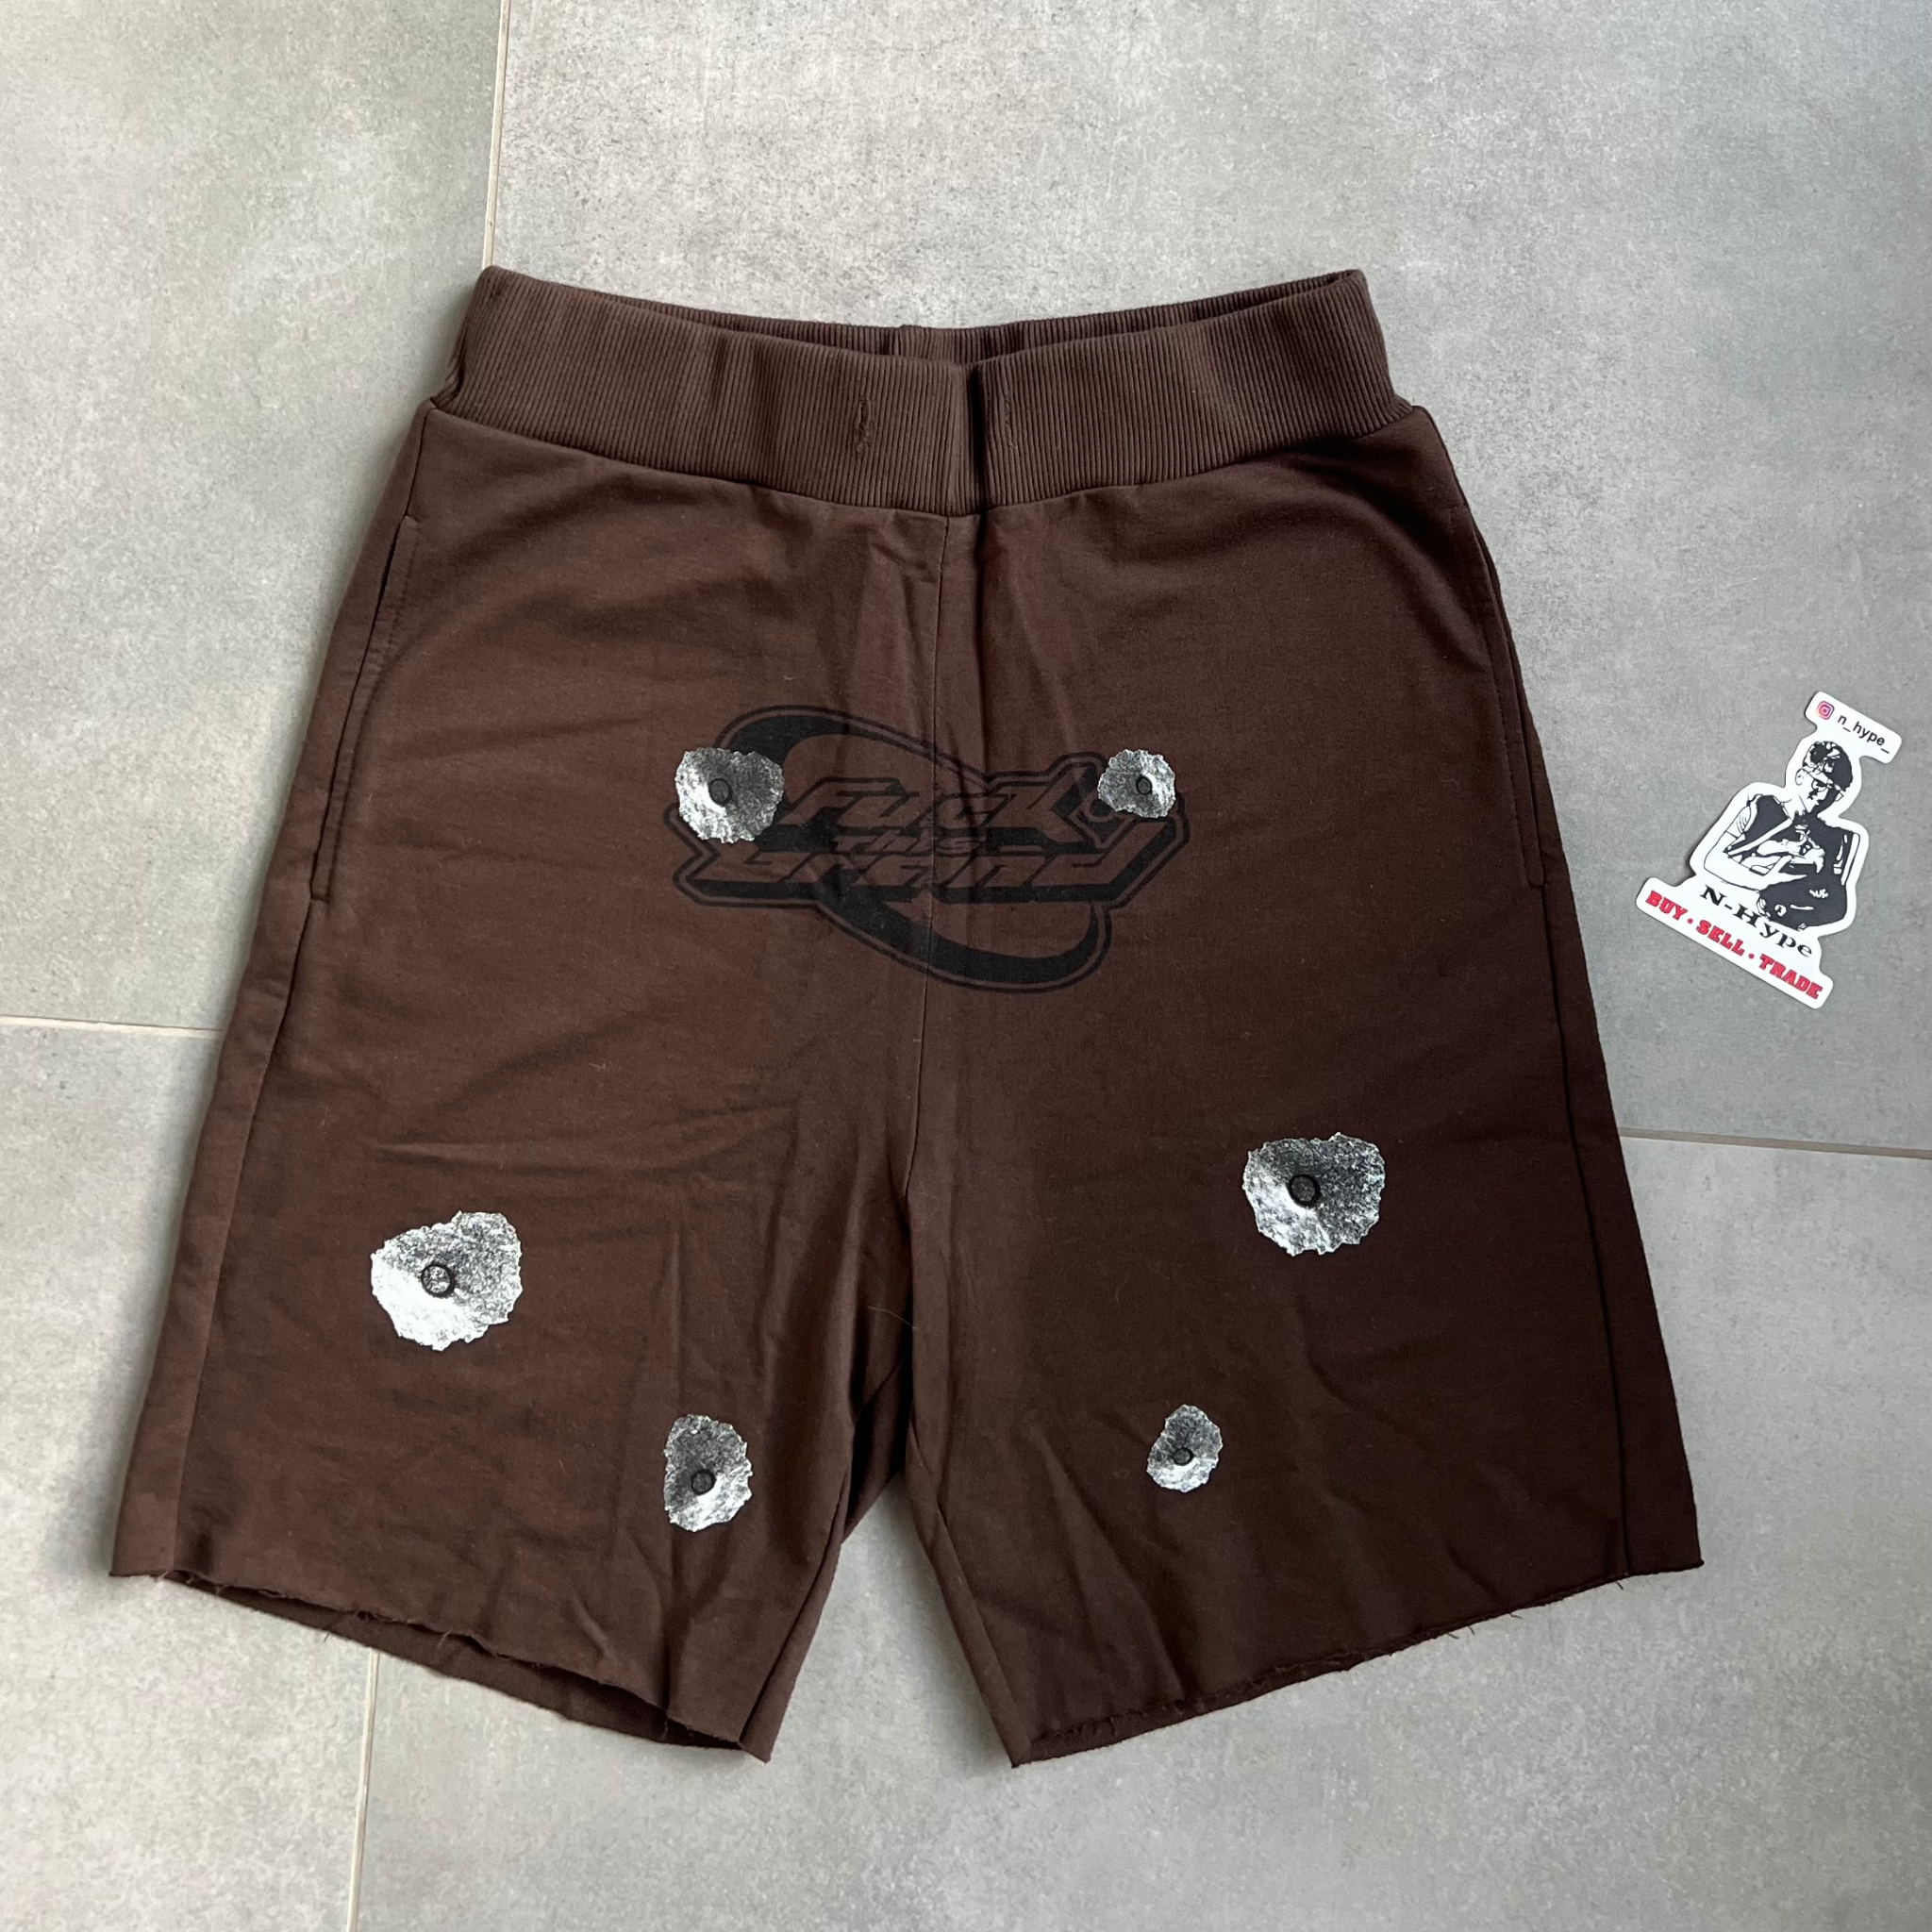 FVCKTHISBRAND Shorts Brown